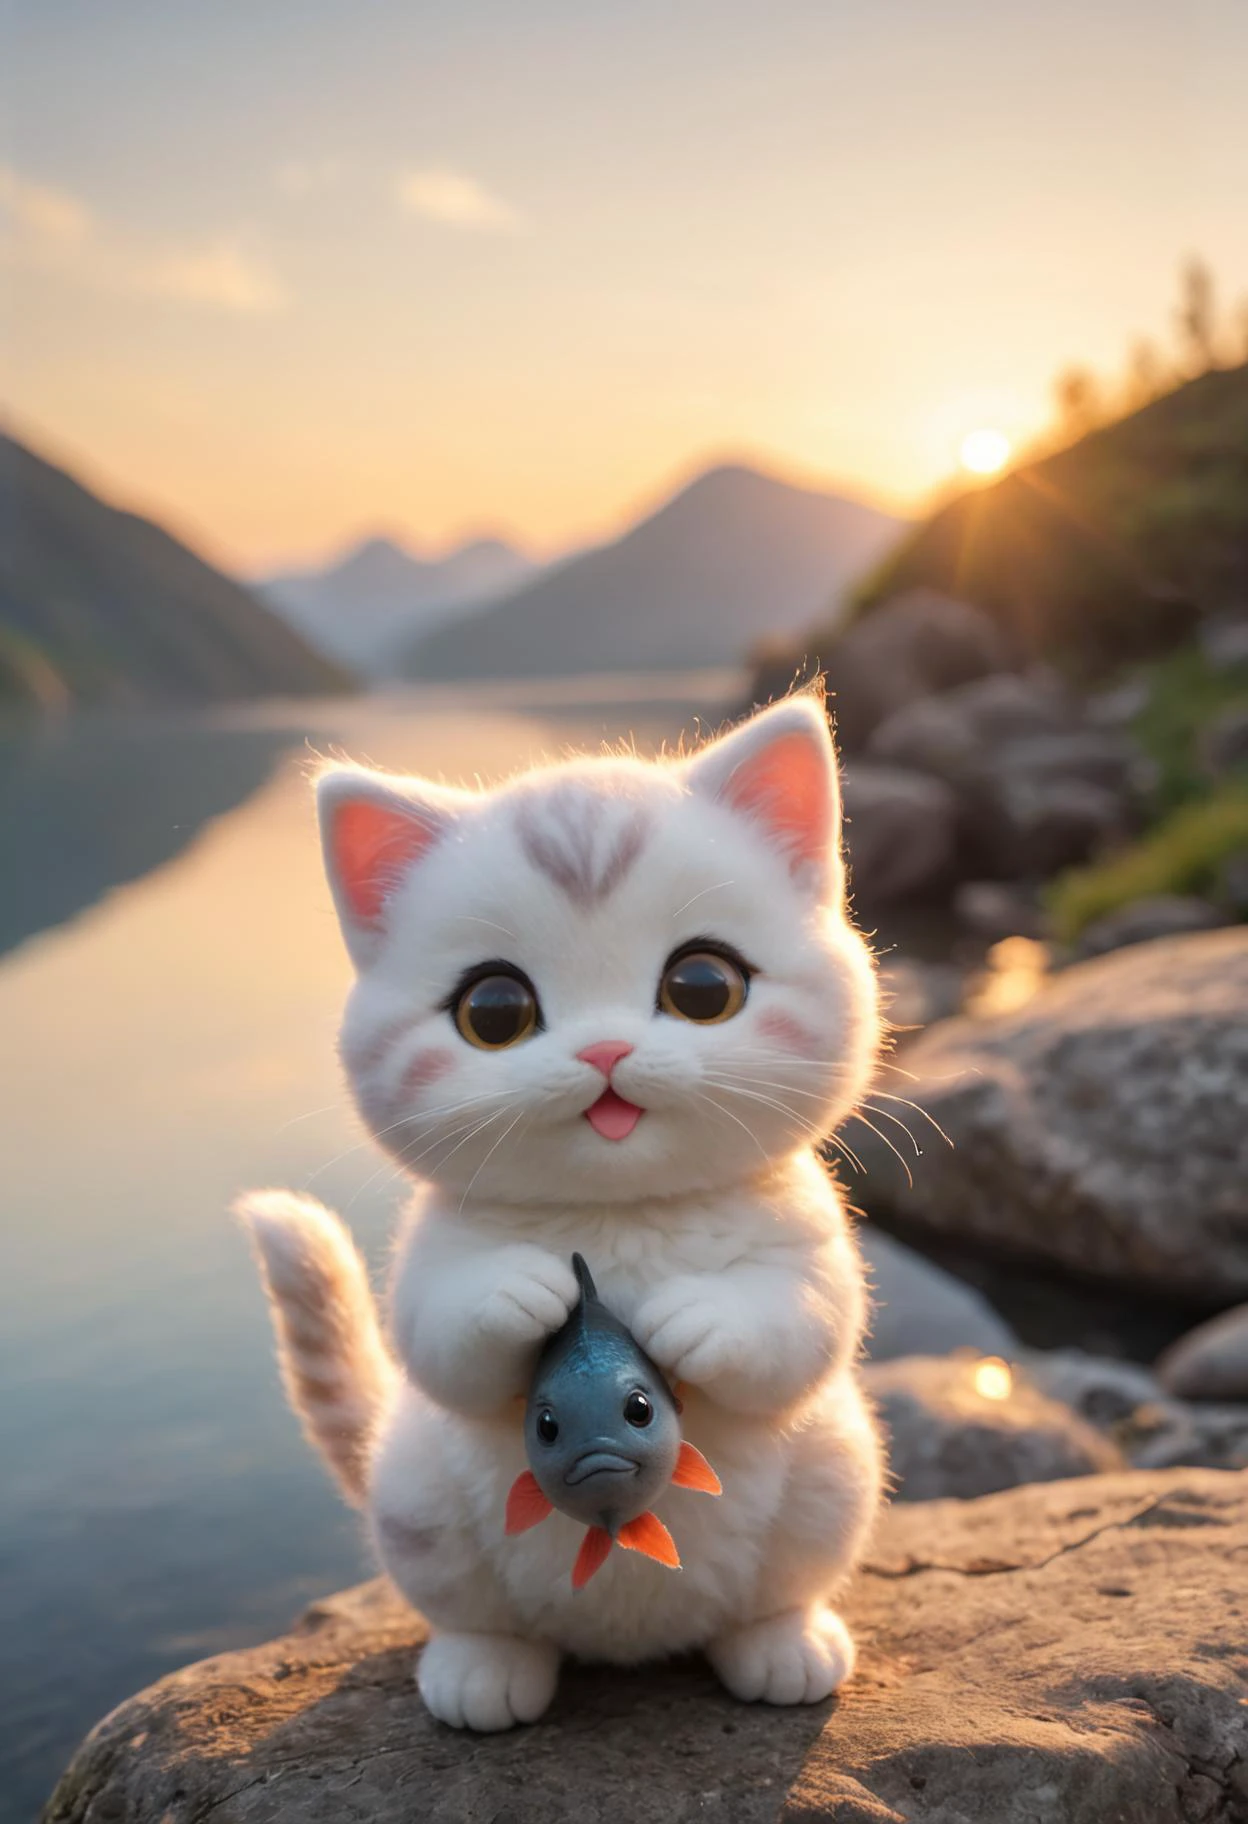 a small, simple, cuddly felt fat kitten holding a fish in its tiny hands, gazing directly into the camera with a joyful smile. The scene is so sweet that it melts even the toughest hearts. Describe the loving atmosphere created by the combination of felt, smiles, and hearts diring a beautiful sunrise 